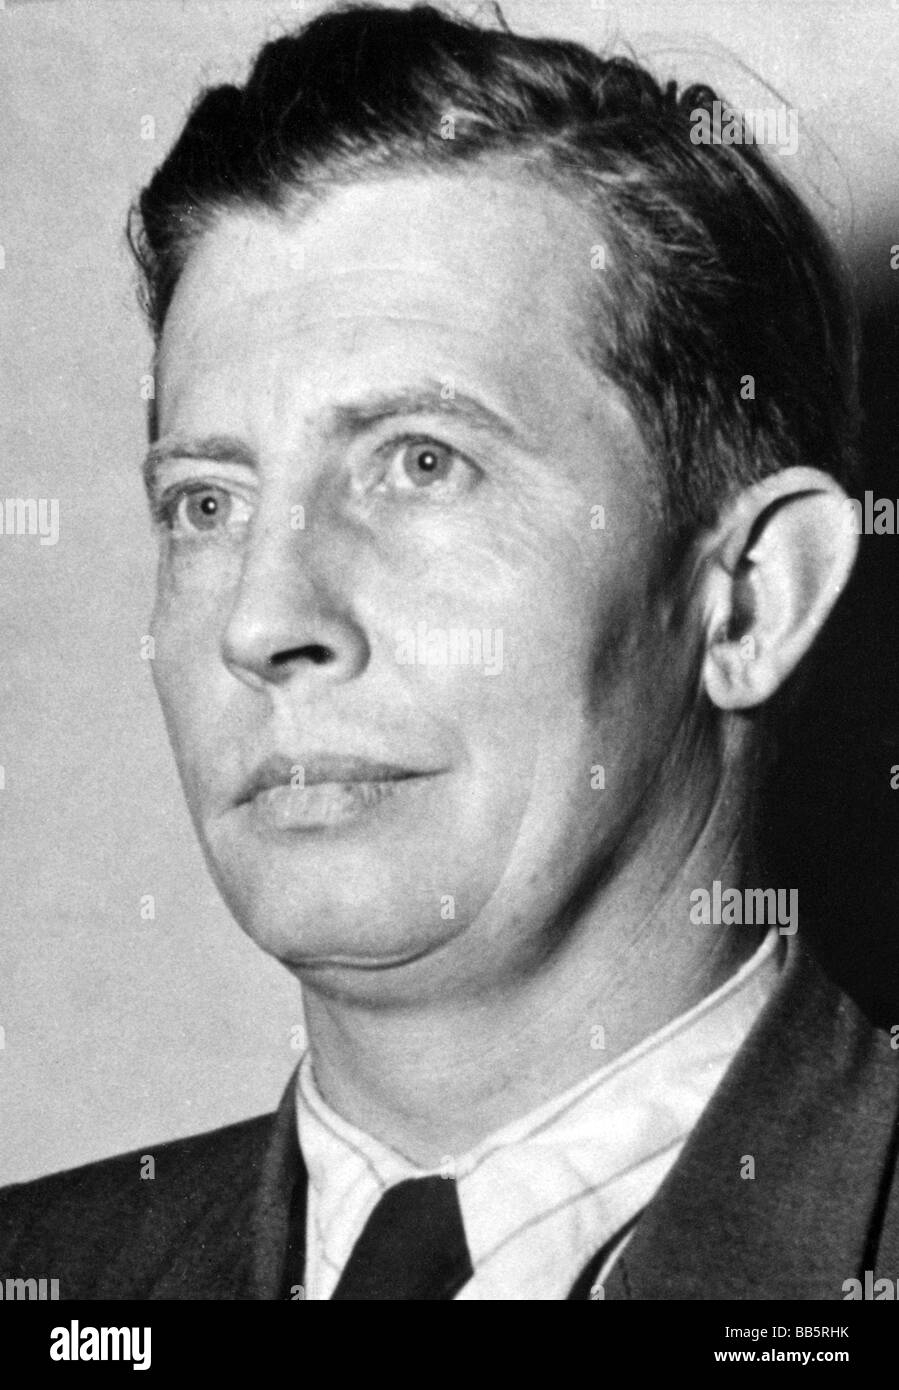 Stain, Walter, 27.12.1916 - 3.2.2001, German politician (GB/BHE), Bavarian Minister for Labour and Social Affairs 1954 - 1962, portrait, 1957, , Stock Photo